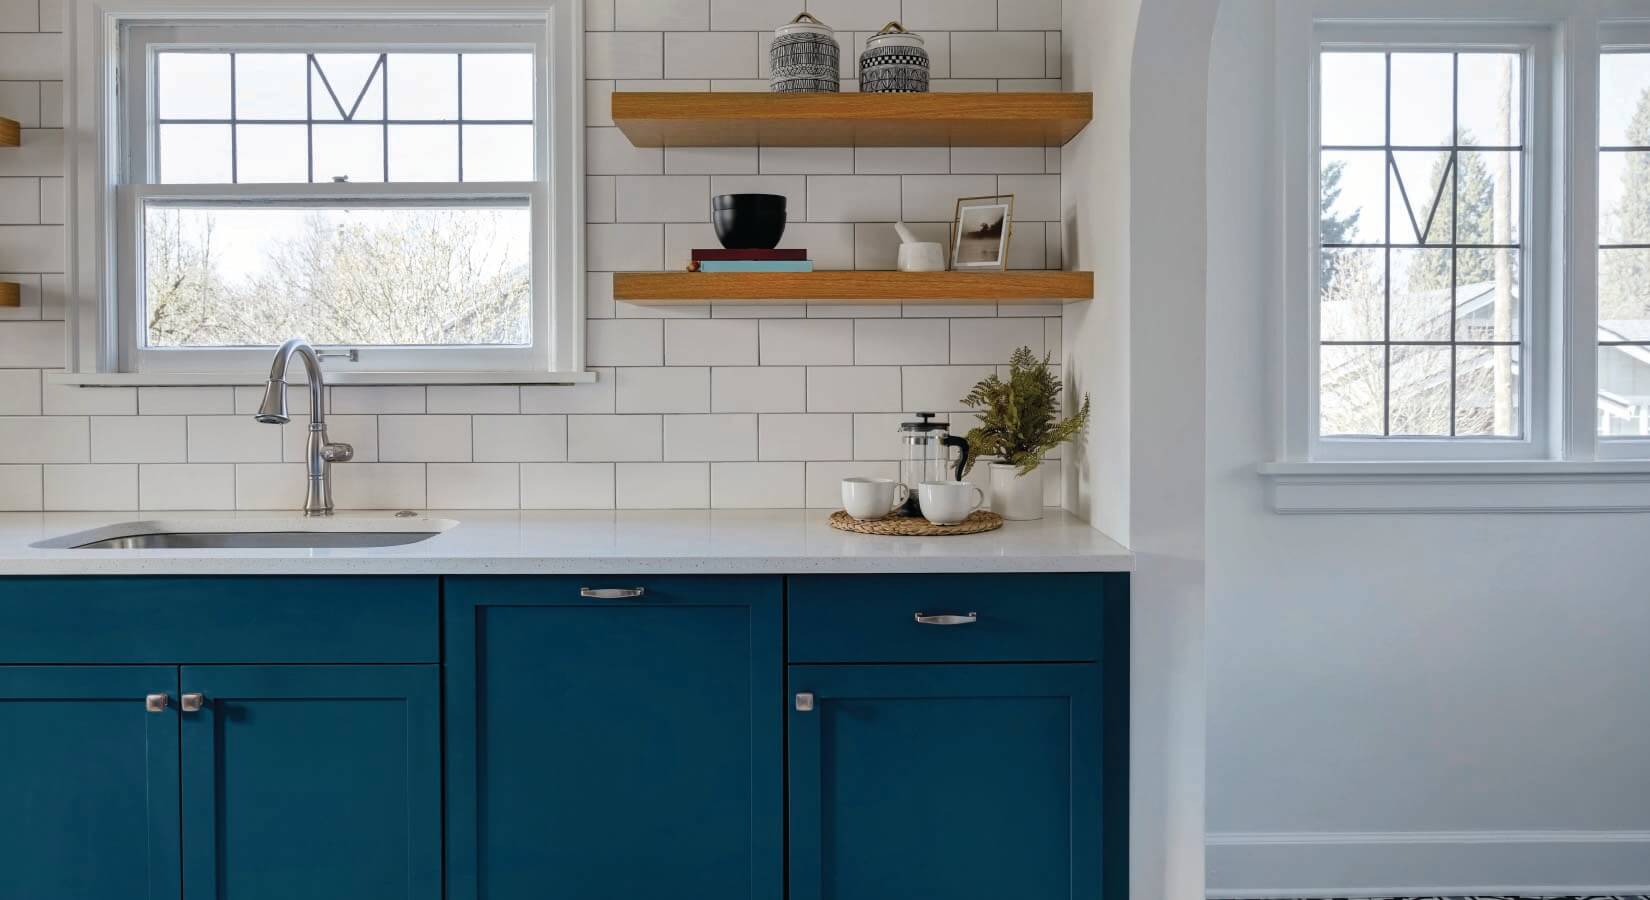 Kitchen with navy blue cabinets, white countertops, wood open shelving, and white subway tile backsplash.